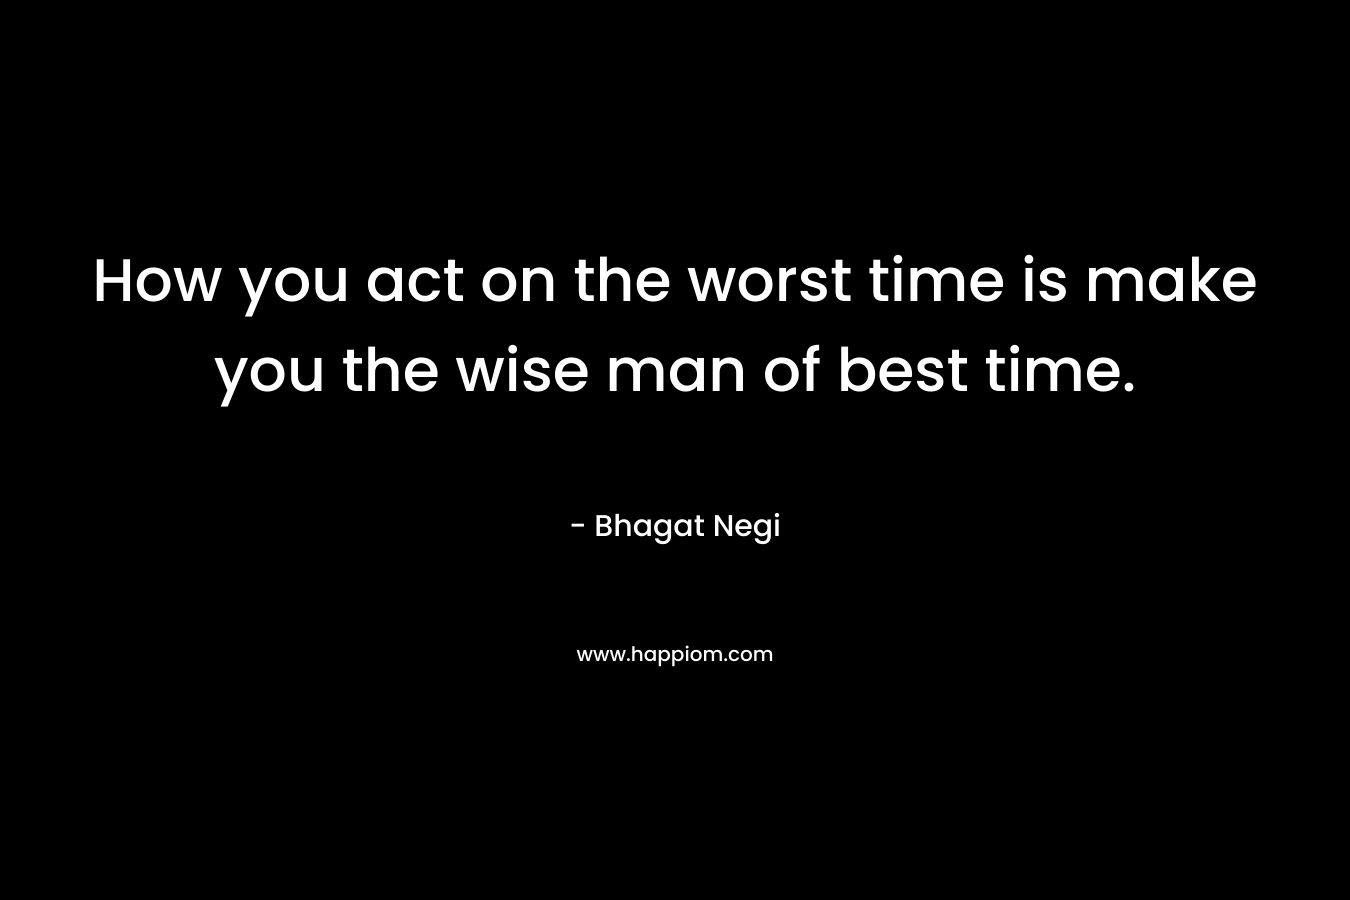 How you act on the worst time is make you the wise man of best time.